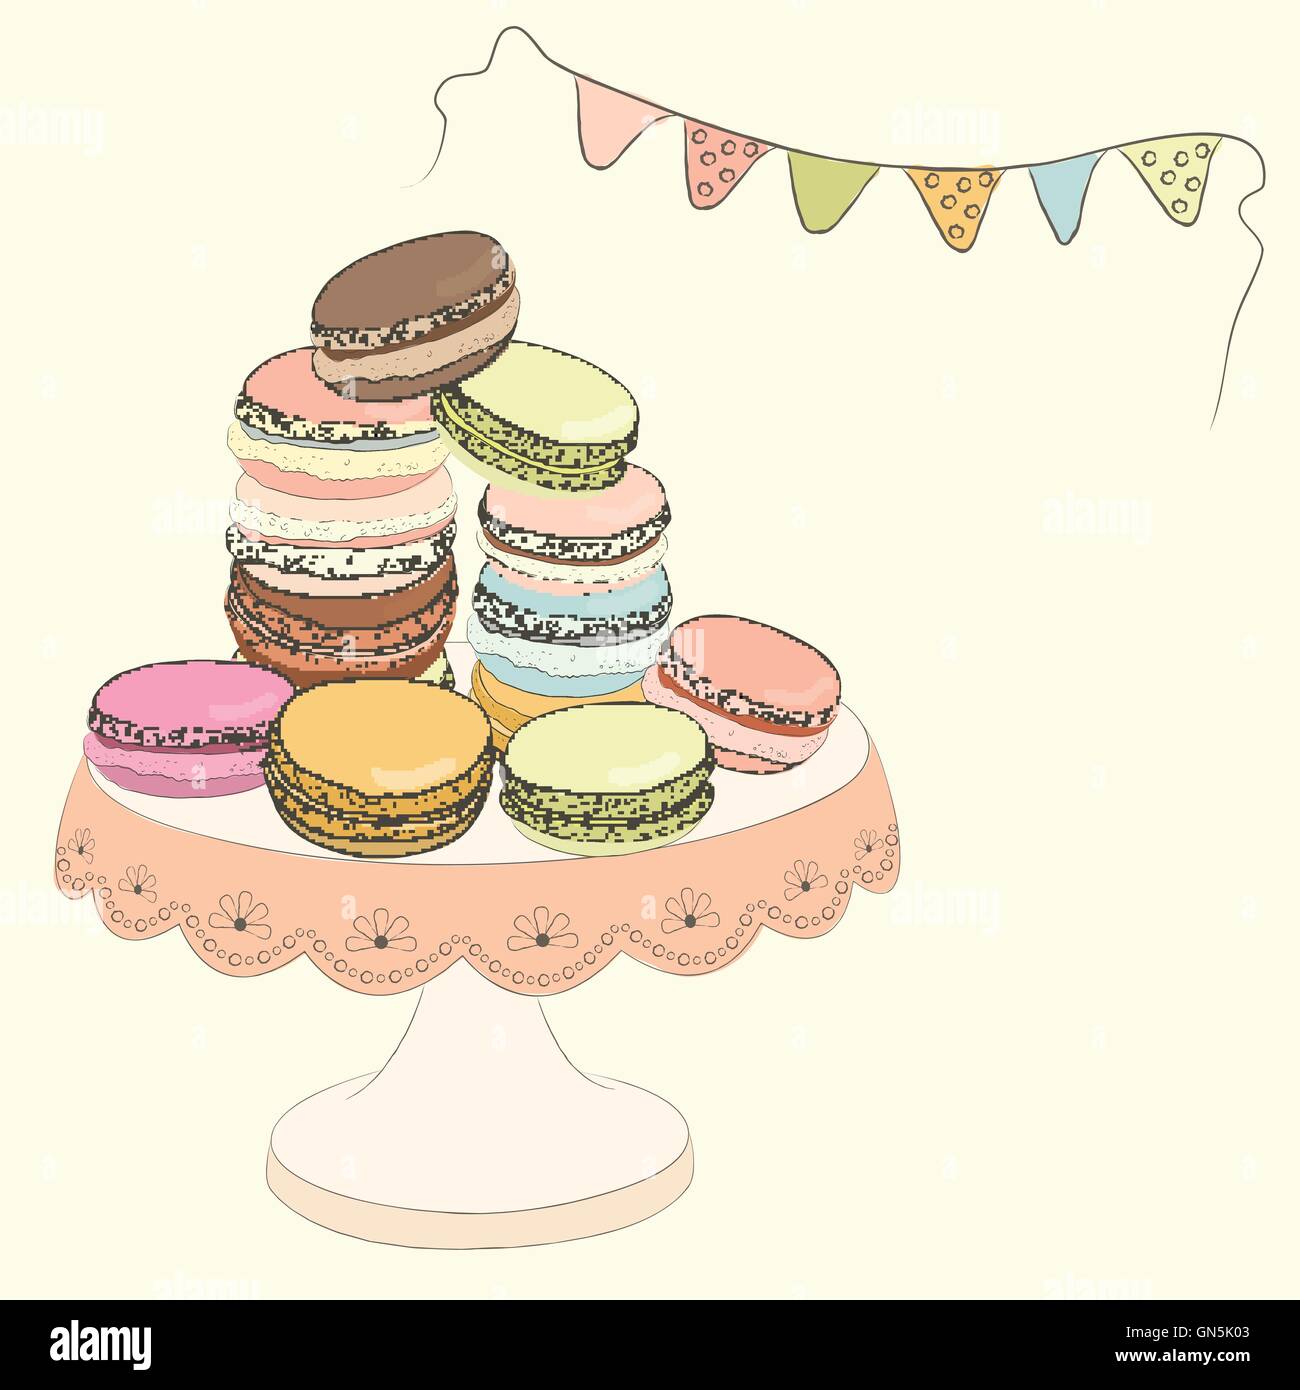 Set of colorful doodle macaroon on plate. Sketch macaroon. Stock Vector